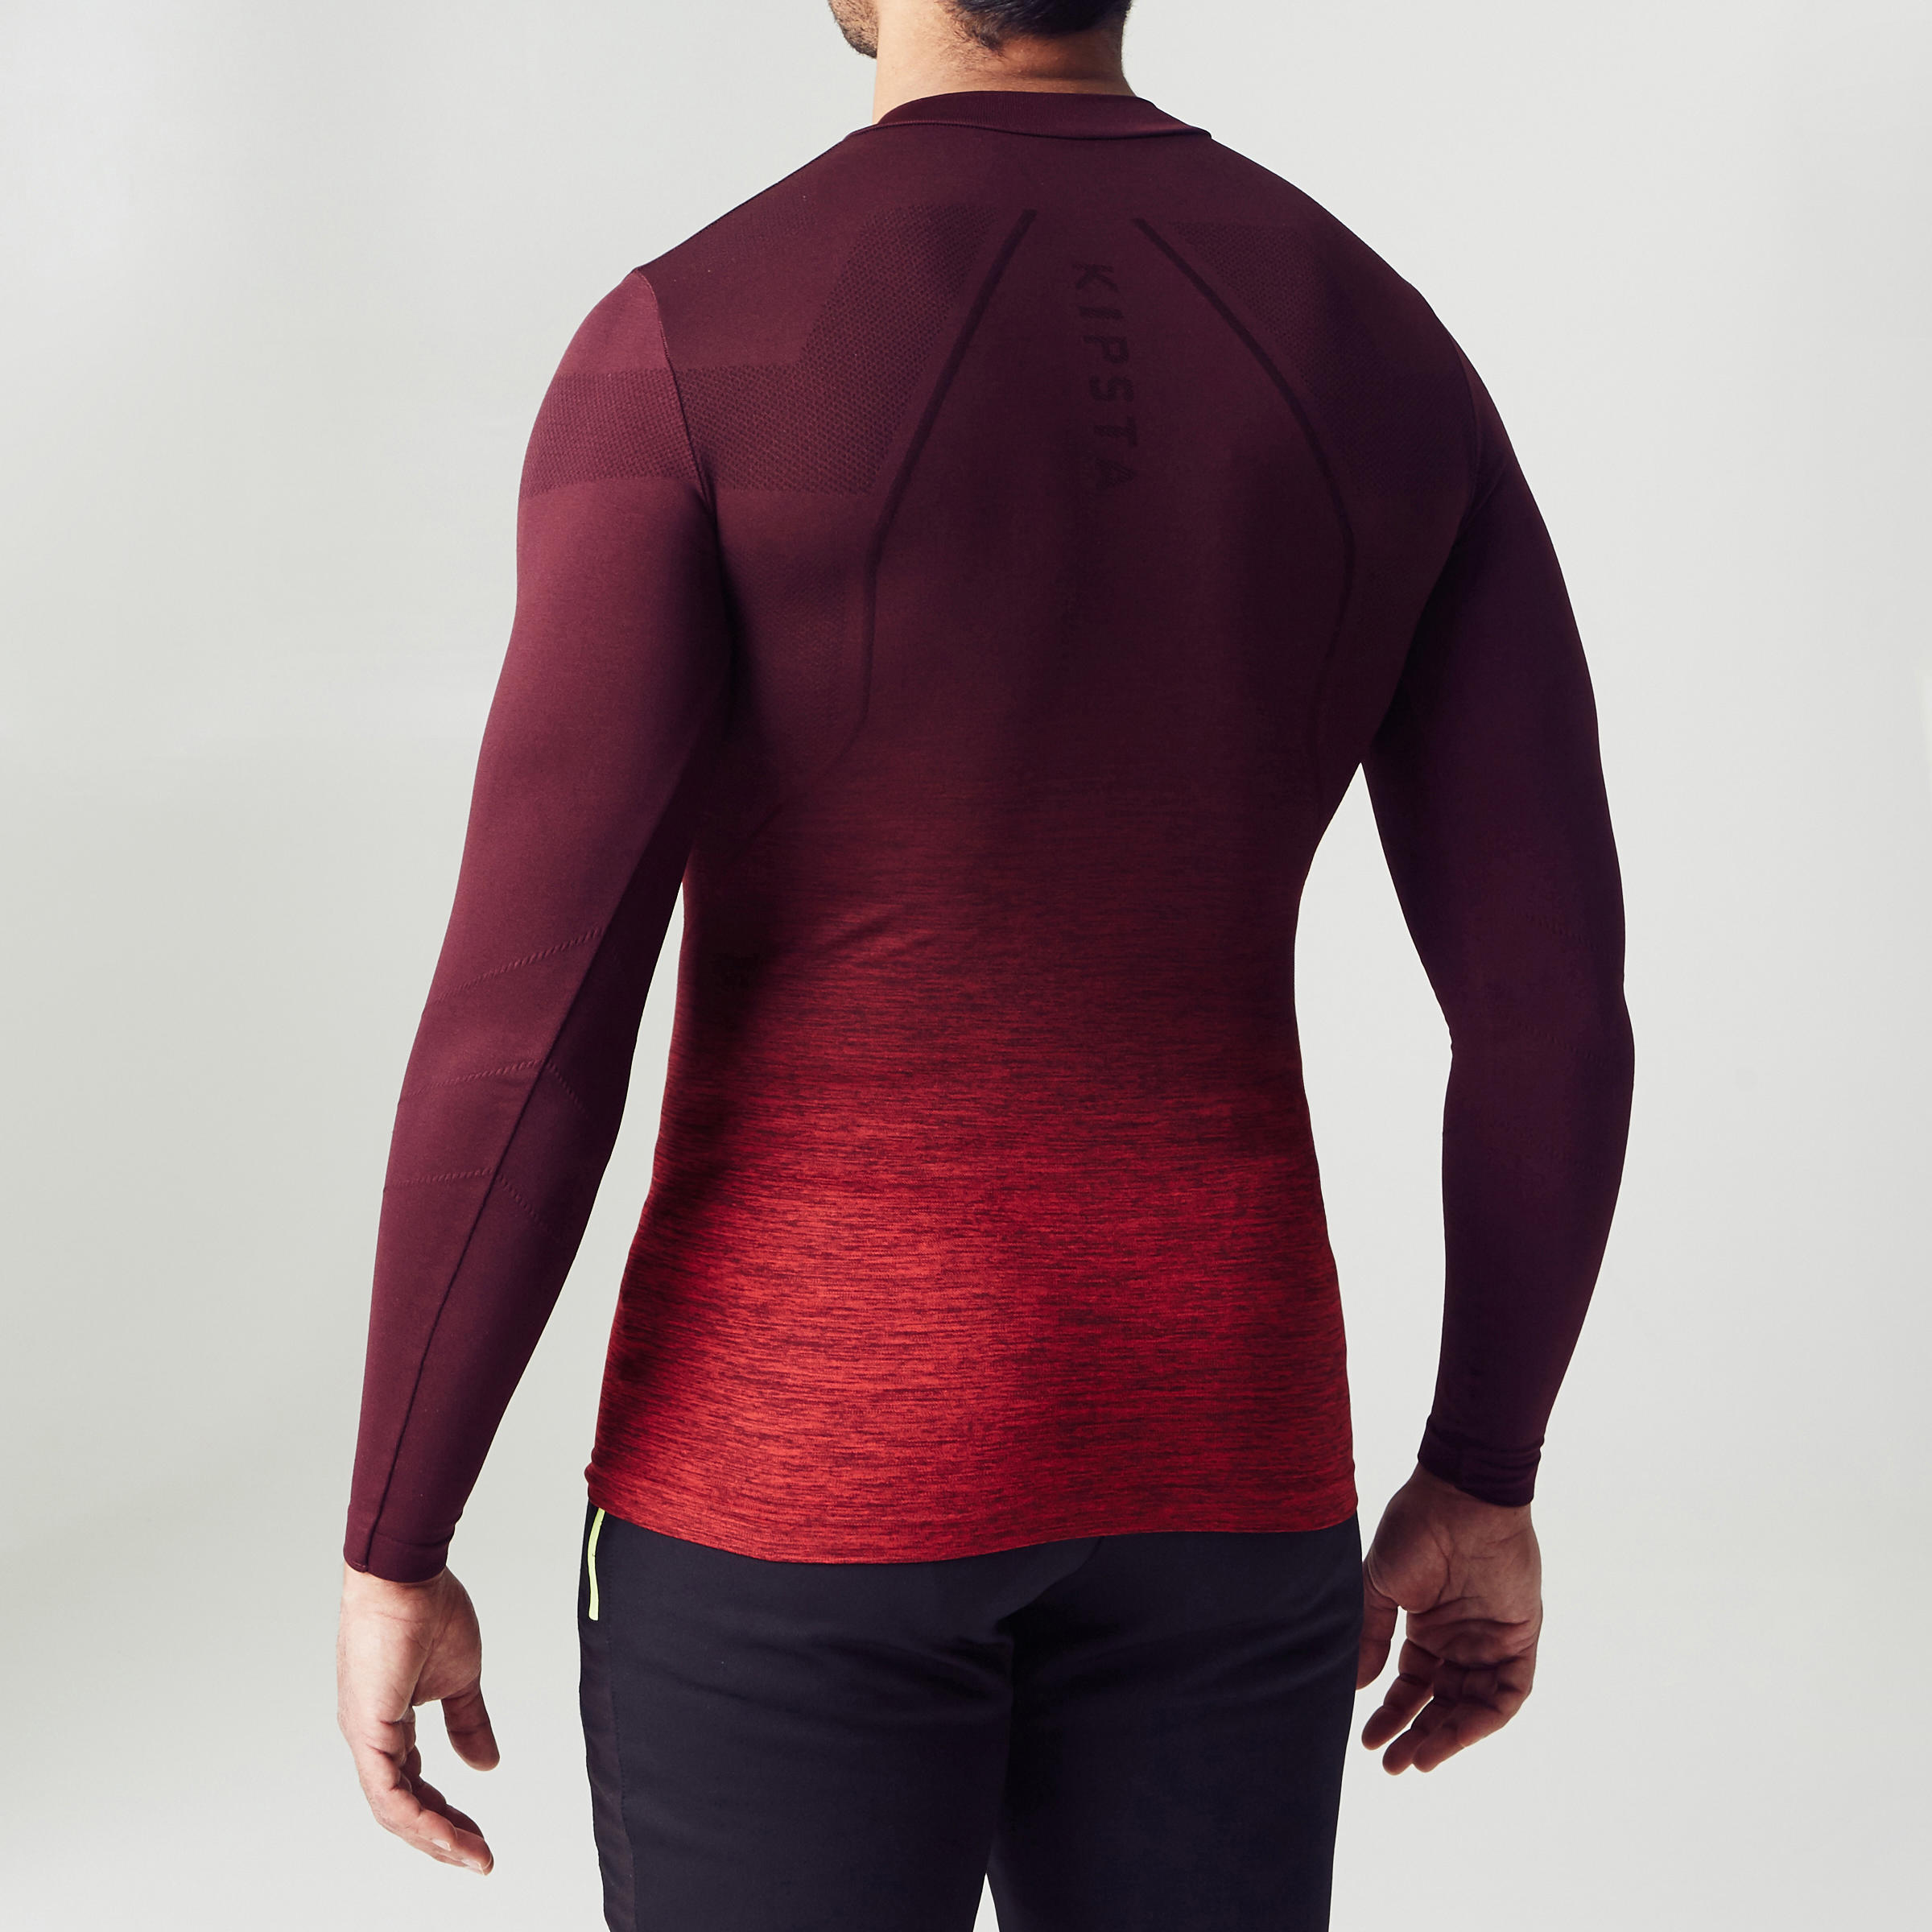 Keepdry 500 Adult Base Layer - Burgundy Ombre 5/11